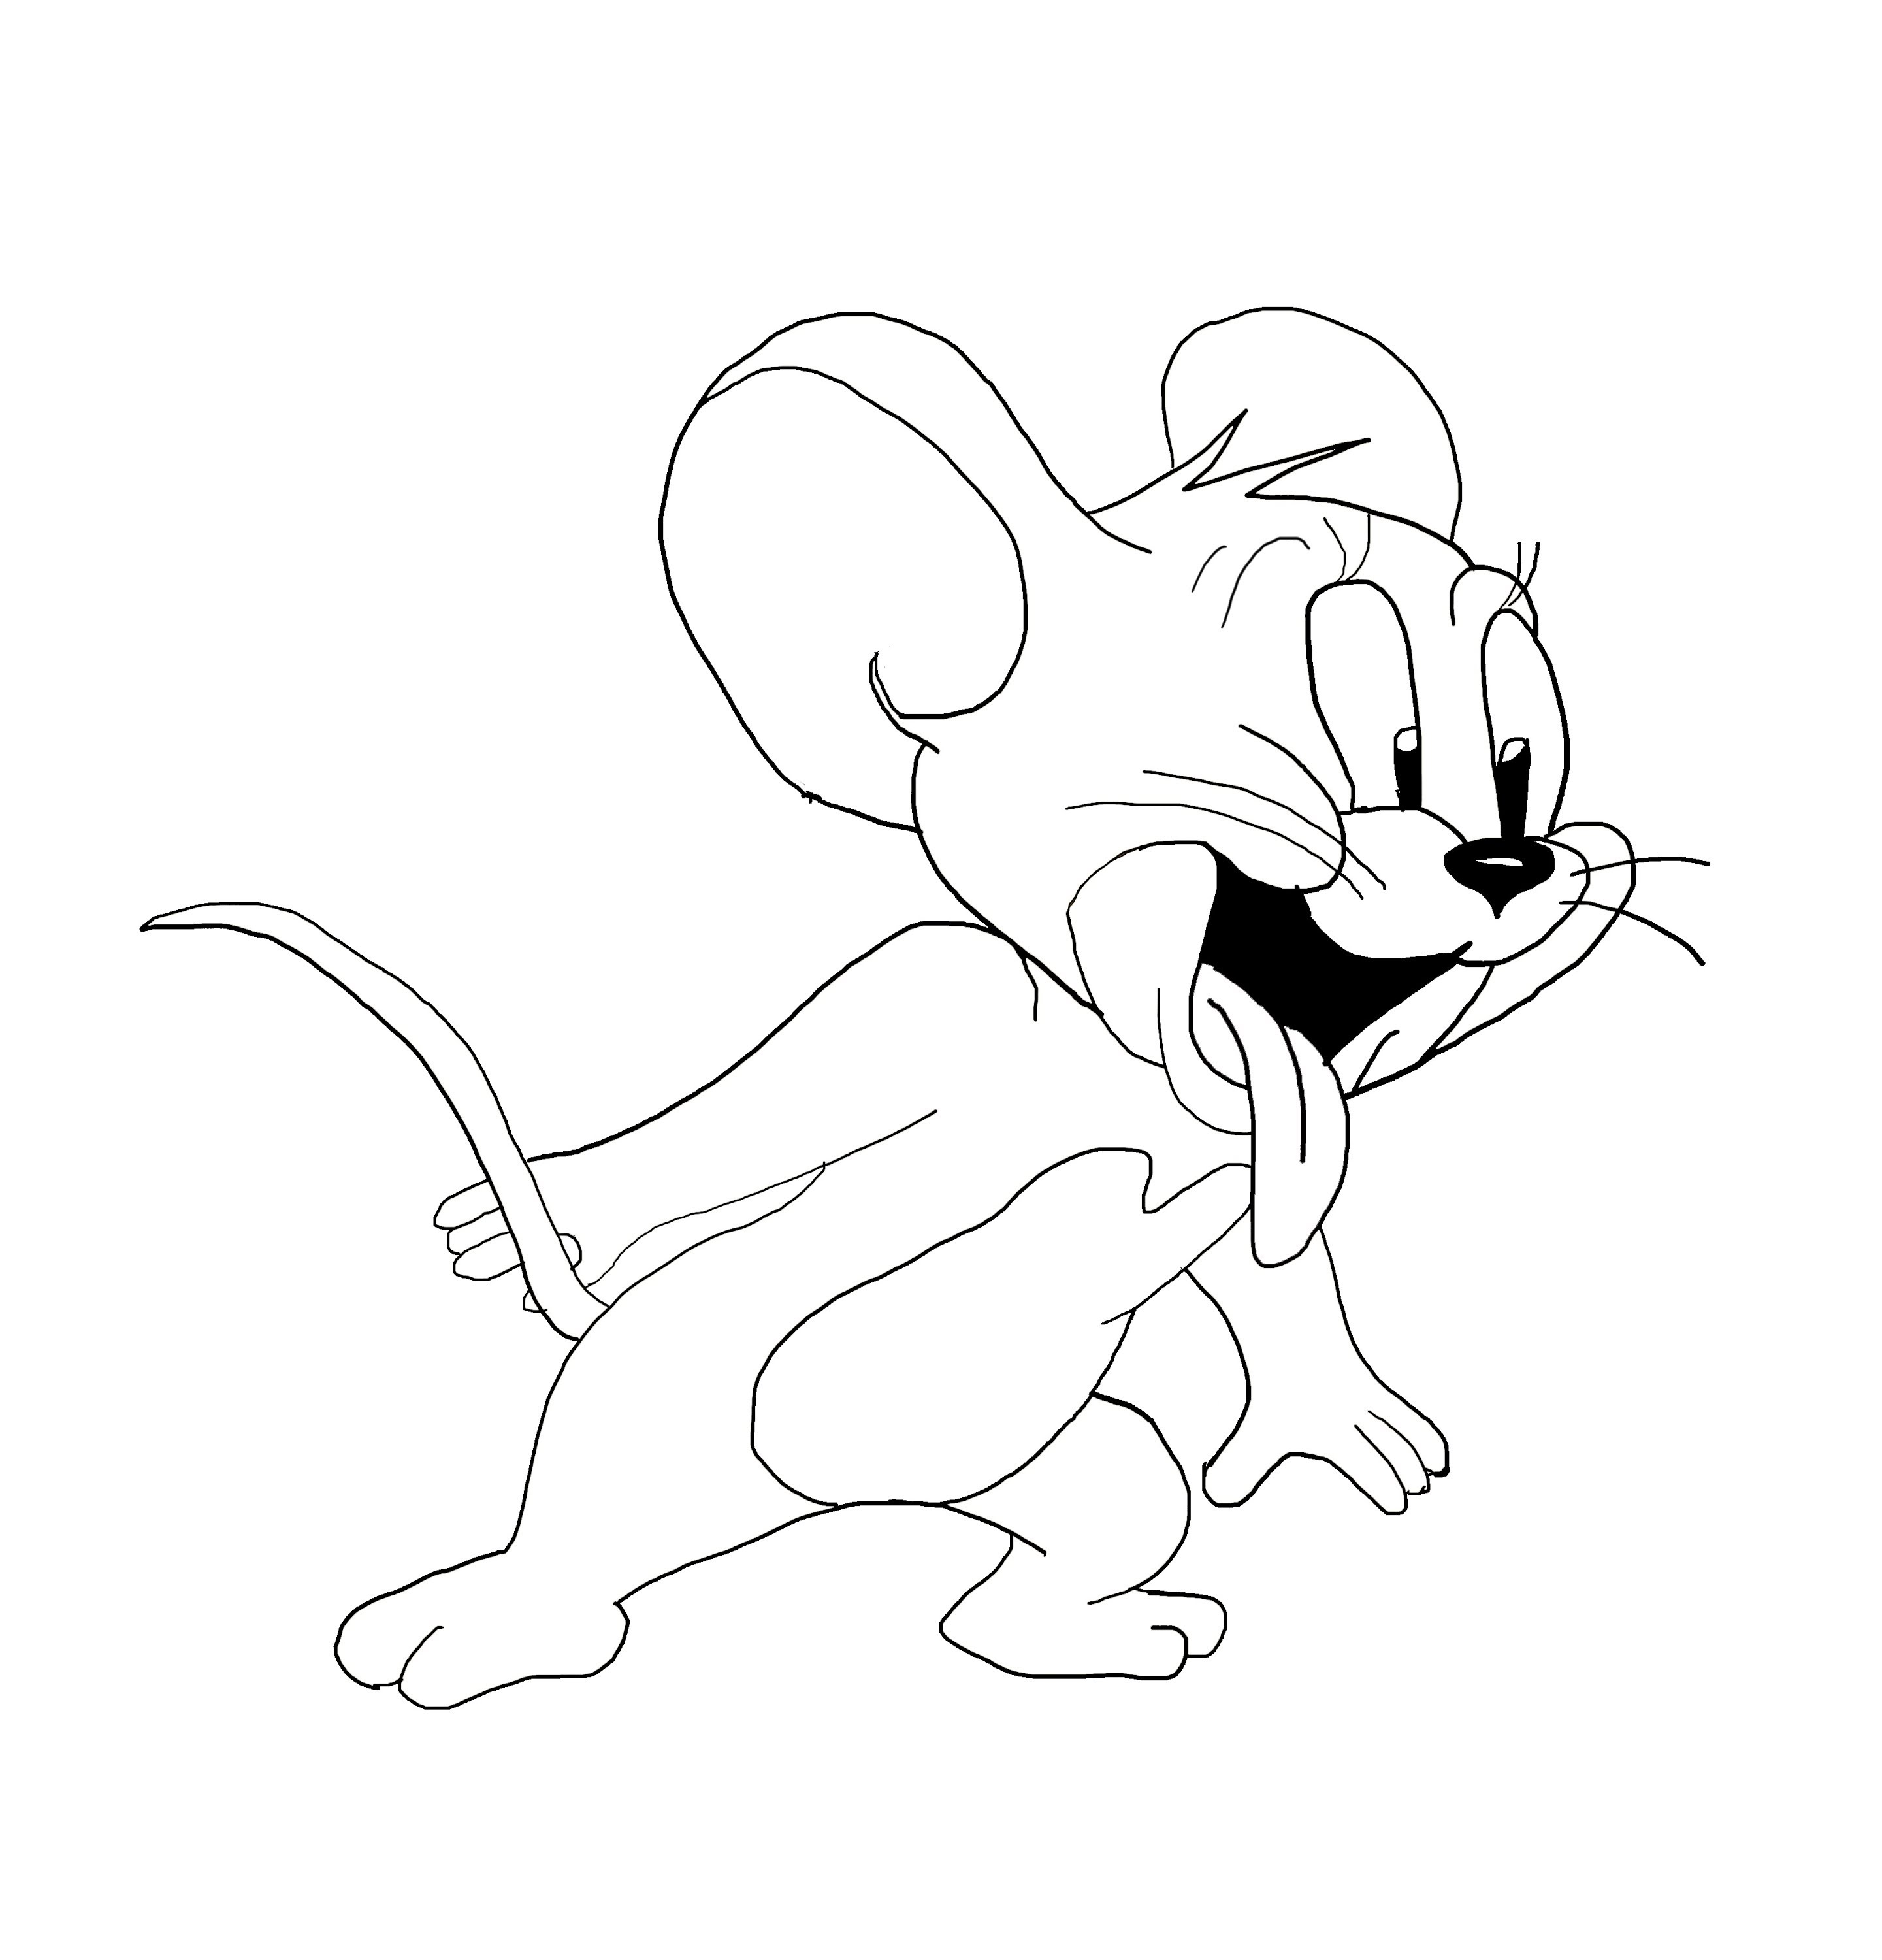 How to Draw Tom and Jerry - Tom - Drawing Step by Step for Beginners -  Cartoons - YouTube